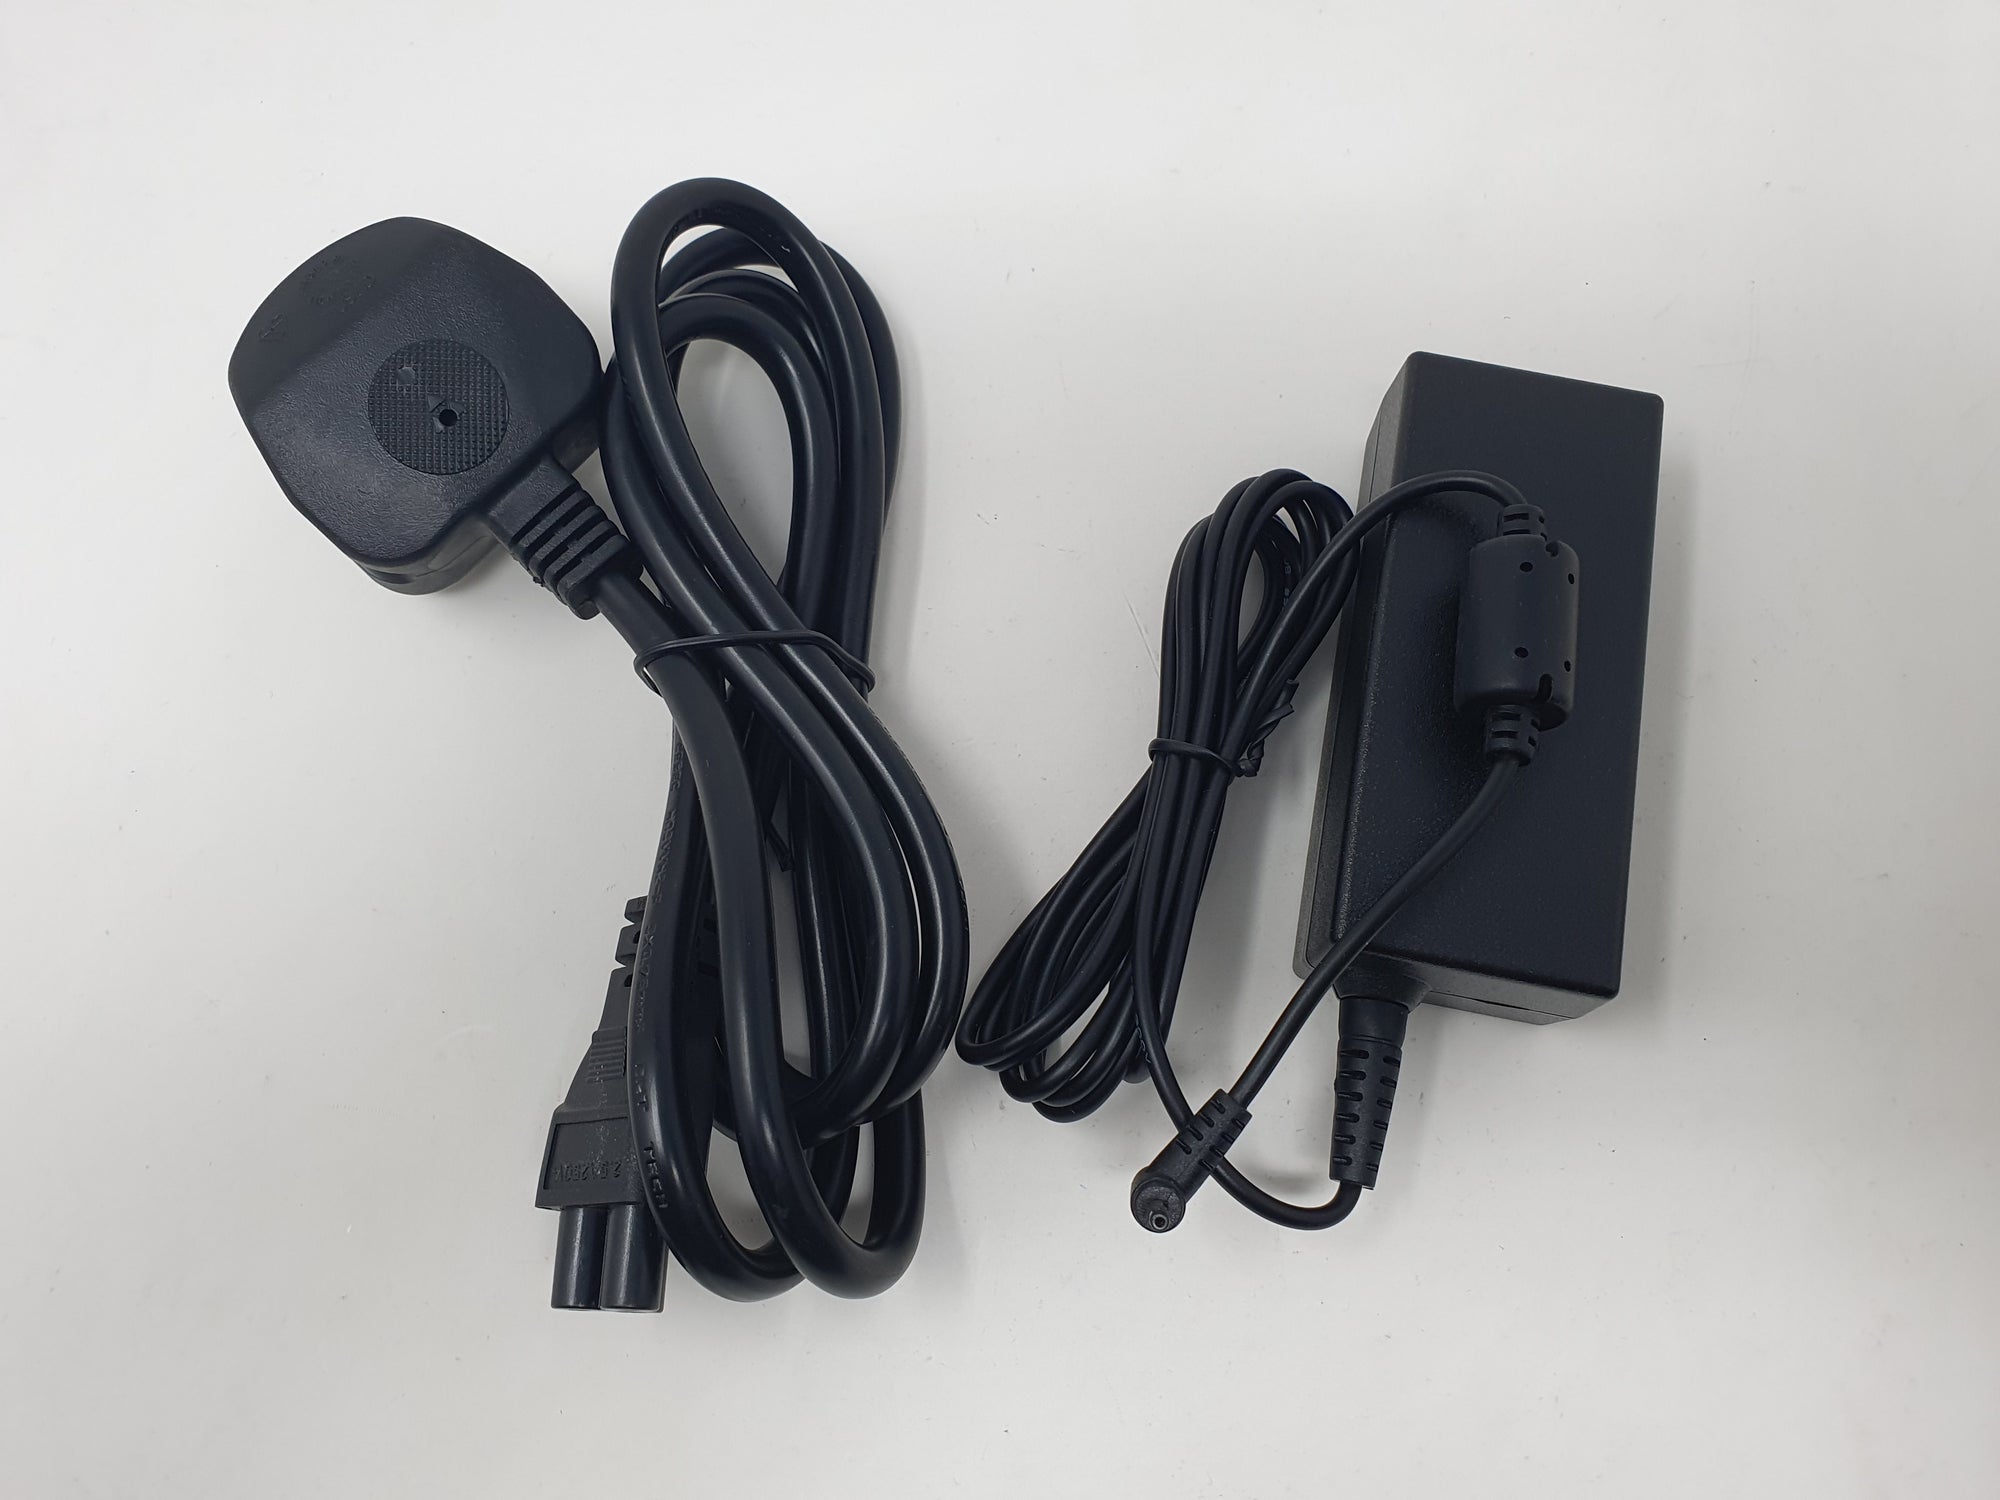 ASUS Laptop Charger Power Supply Adapter 19V 2.1A